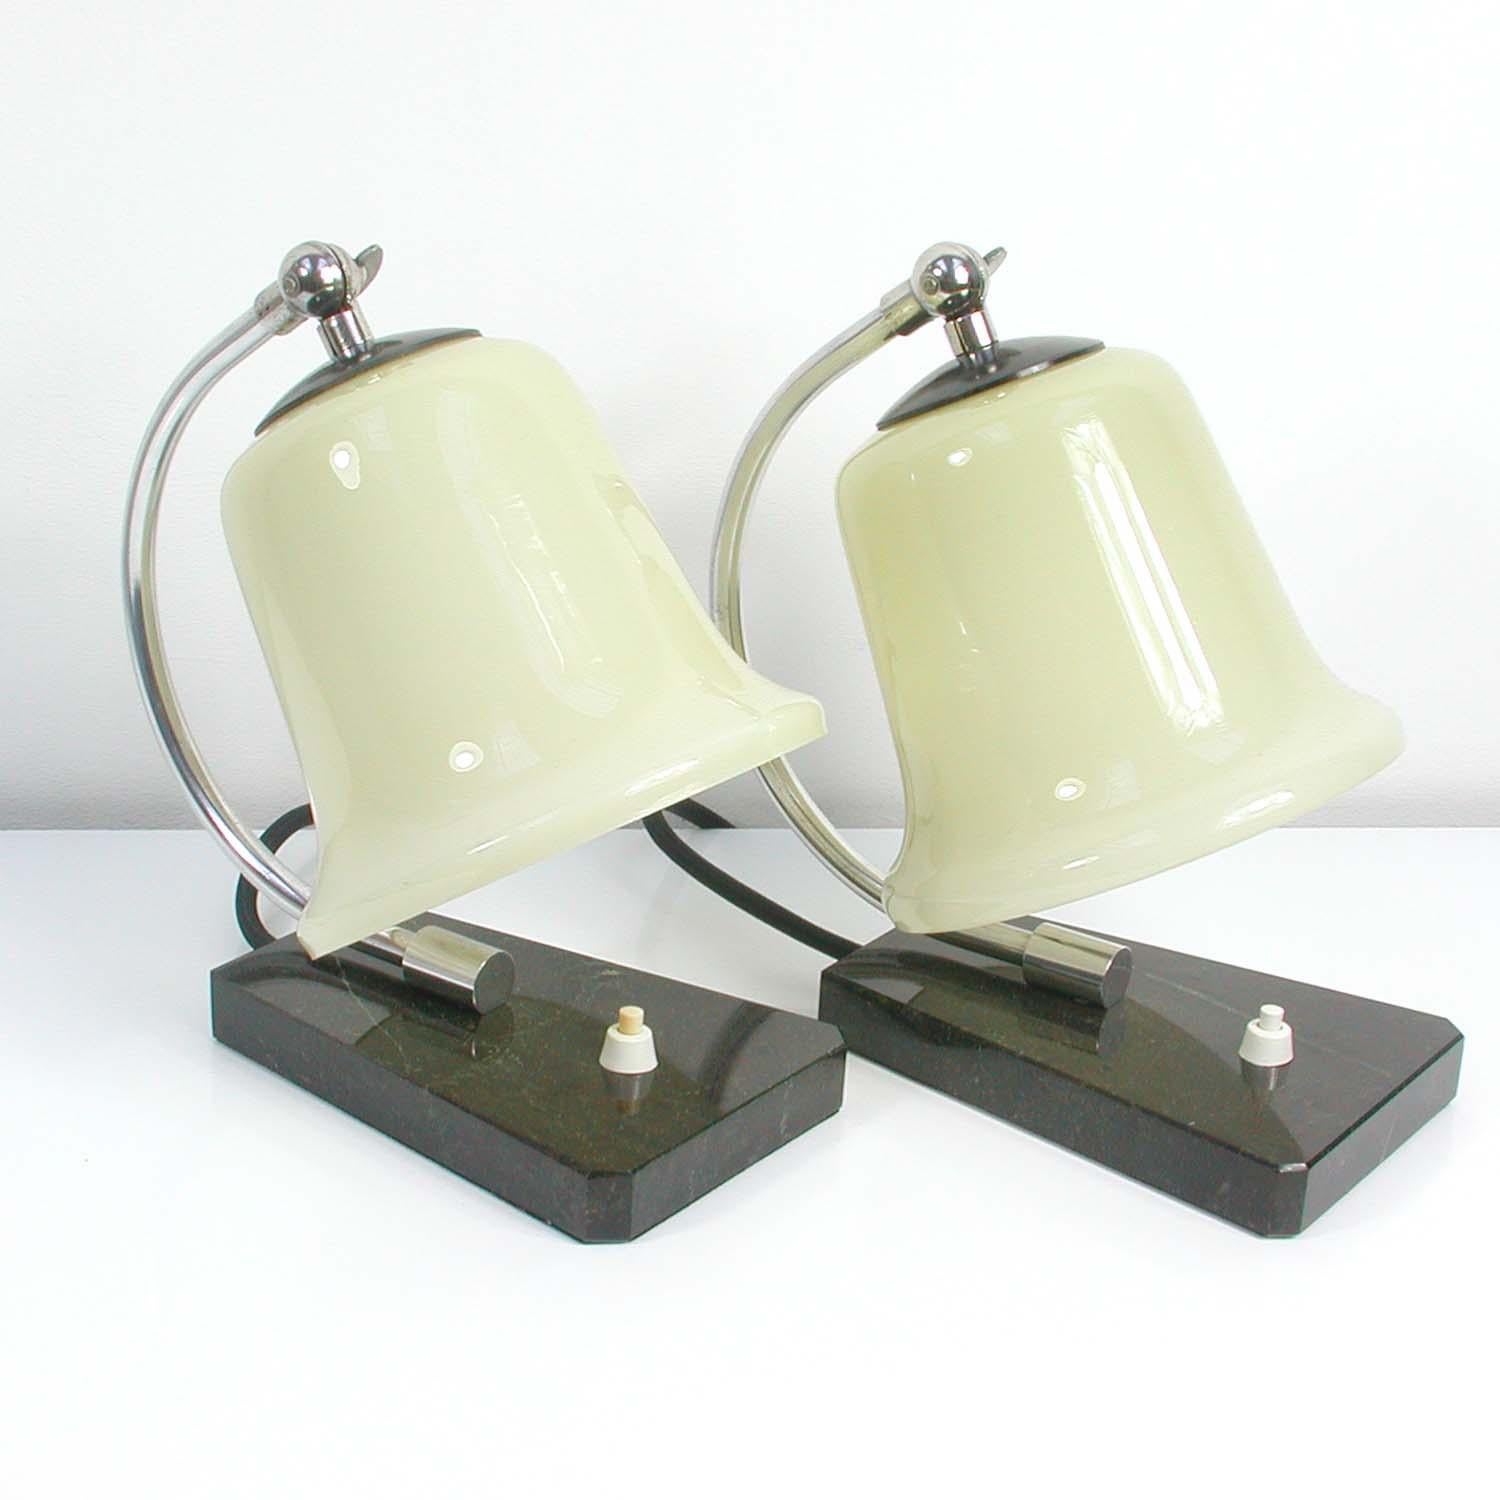 These table lamps were manufactured in Germany during the Bauhaus era in the 1930s. They have got a black marble base and a chrome lamp arm with adjustable opaline glass lamp shades.

Condition is very good with just minor signs of use and some